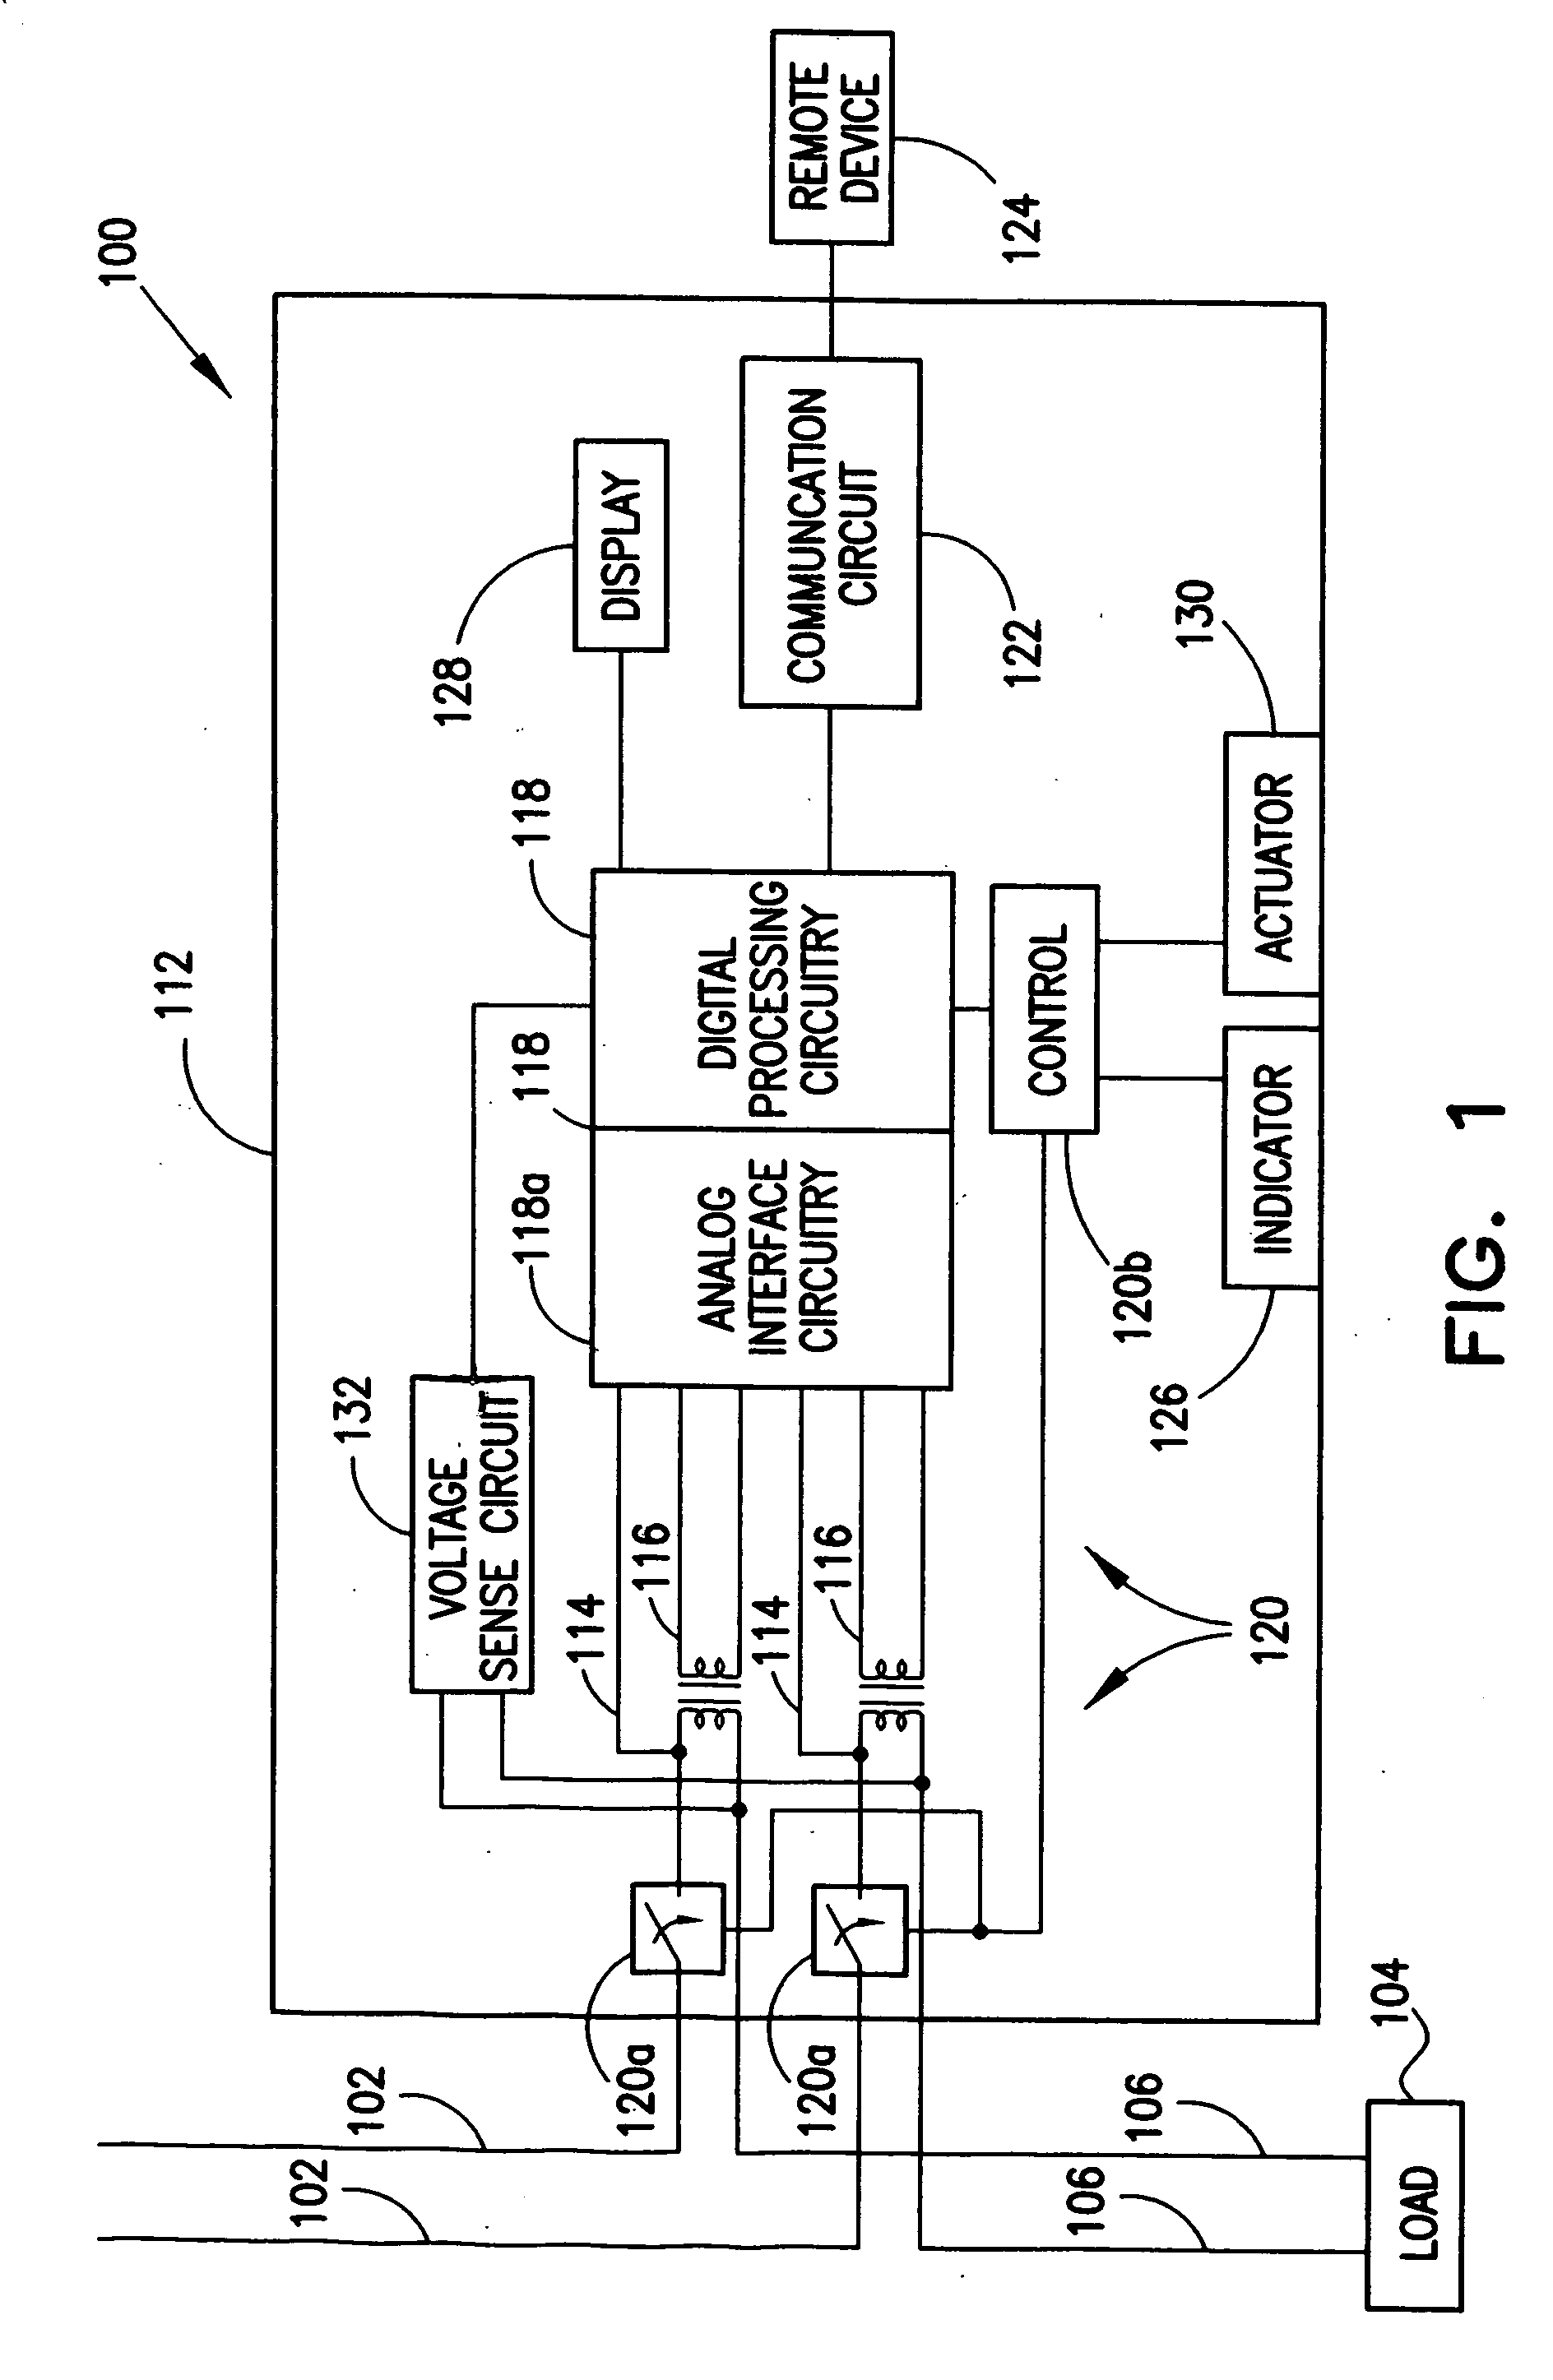 Electrical service disconnect in a modular meter